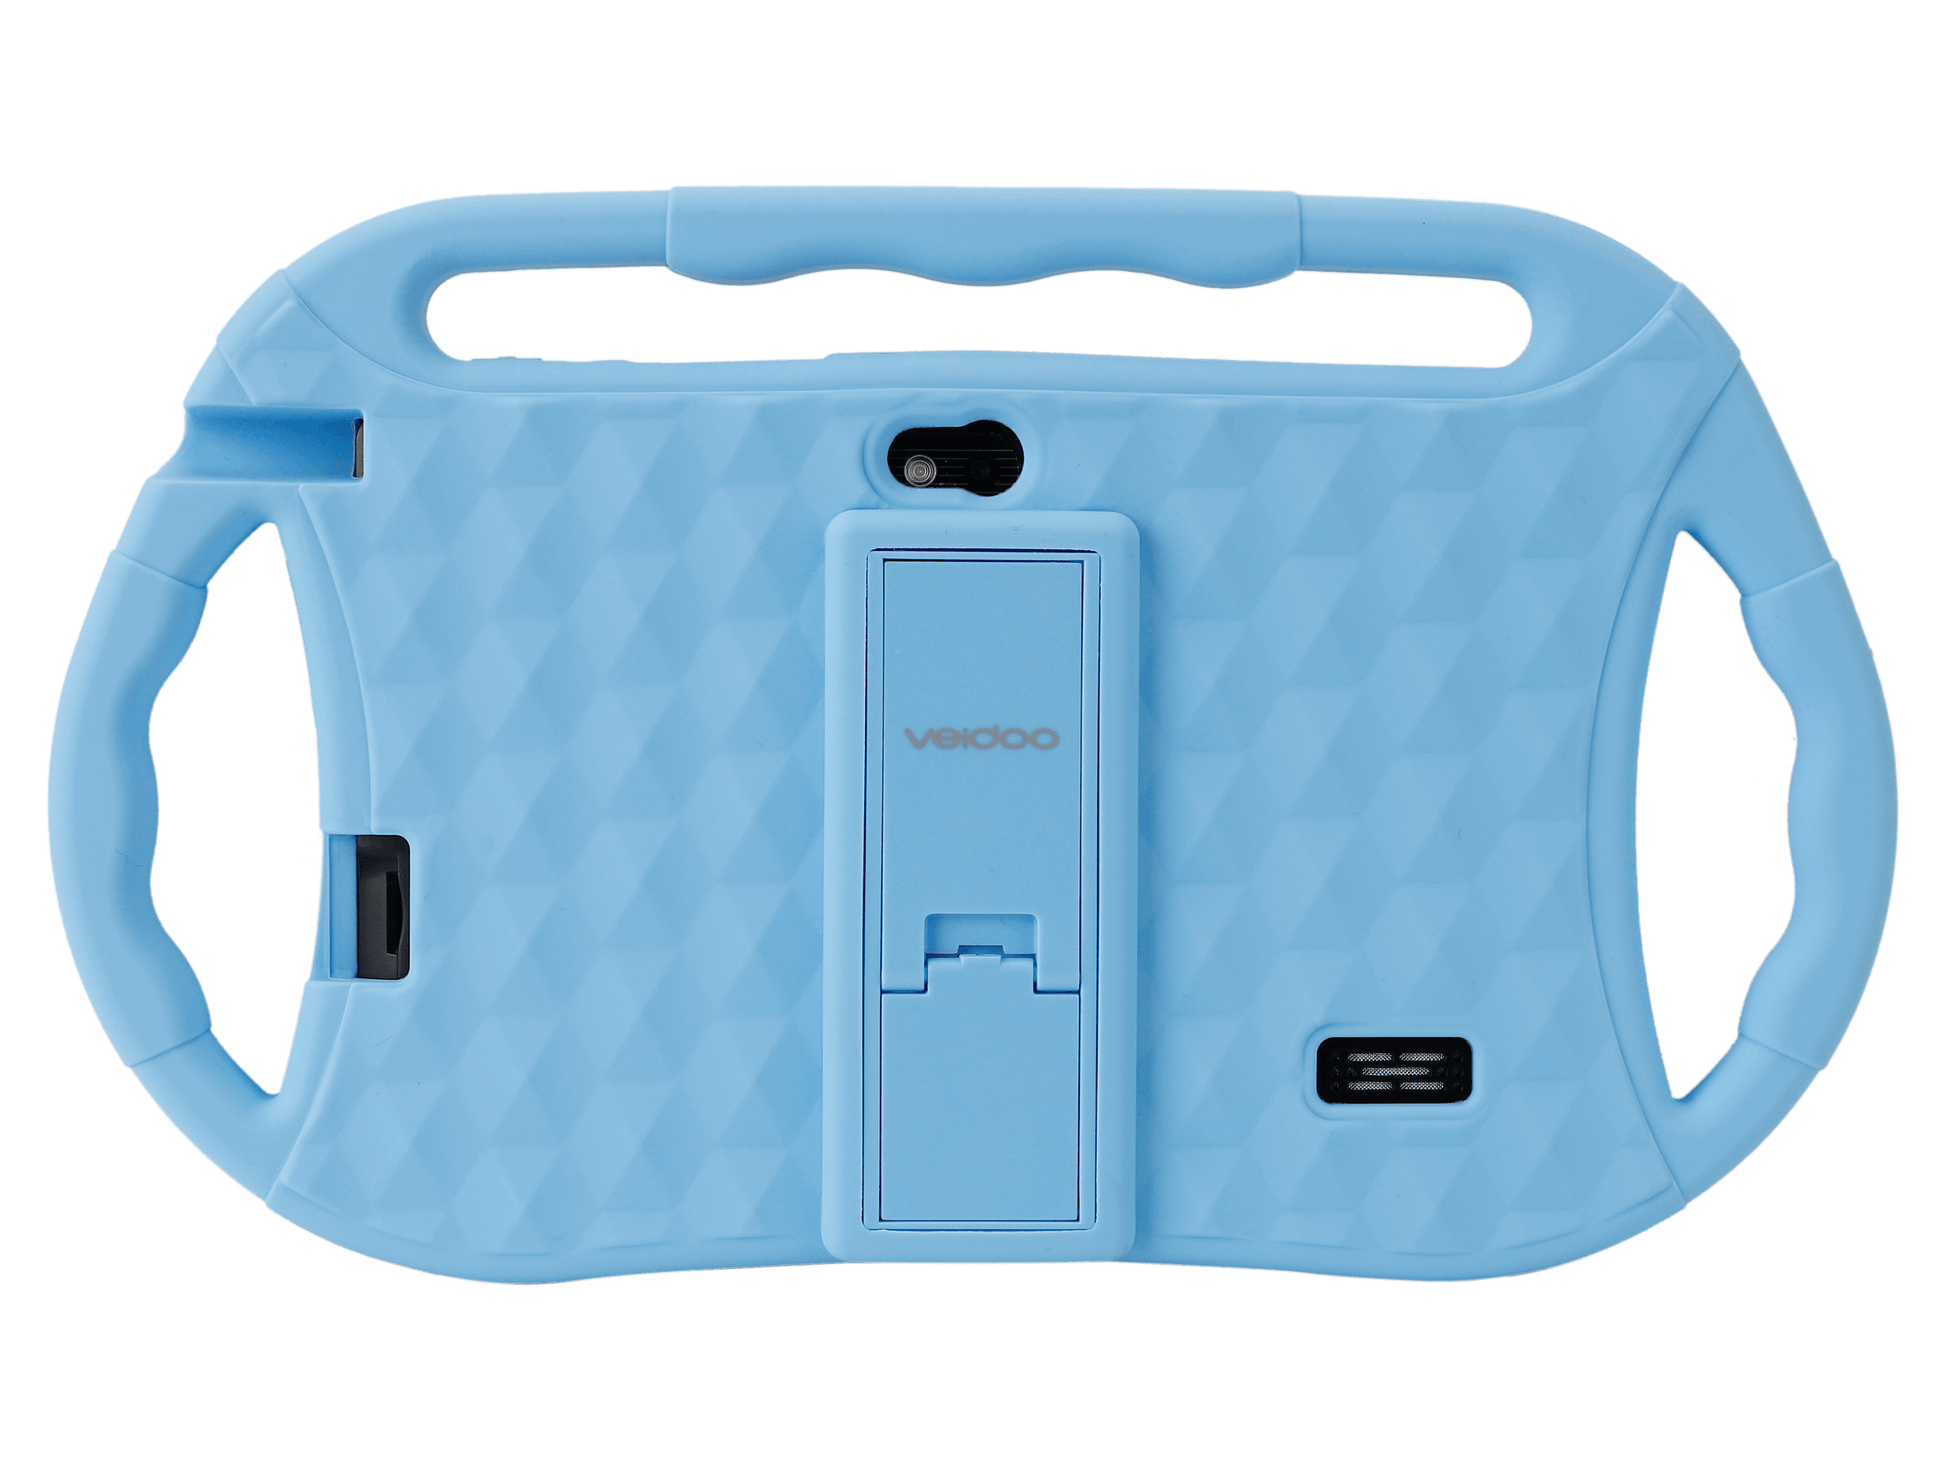 Veidoo 7” Android Tablet with protective case - Blue - SuperHub